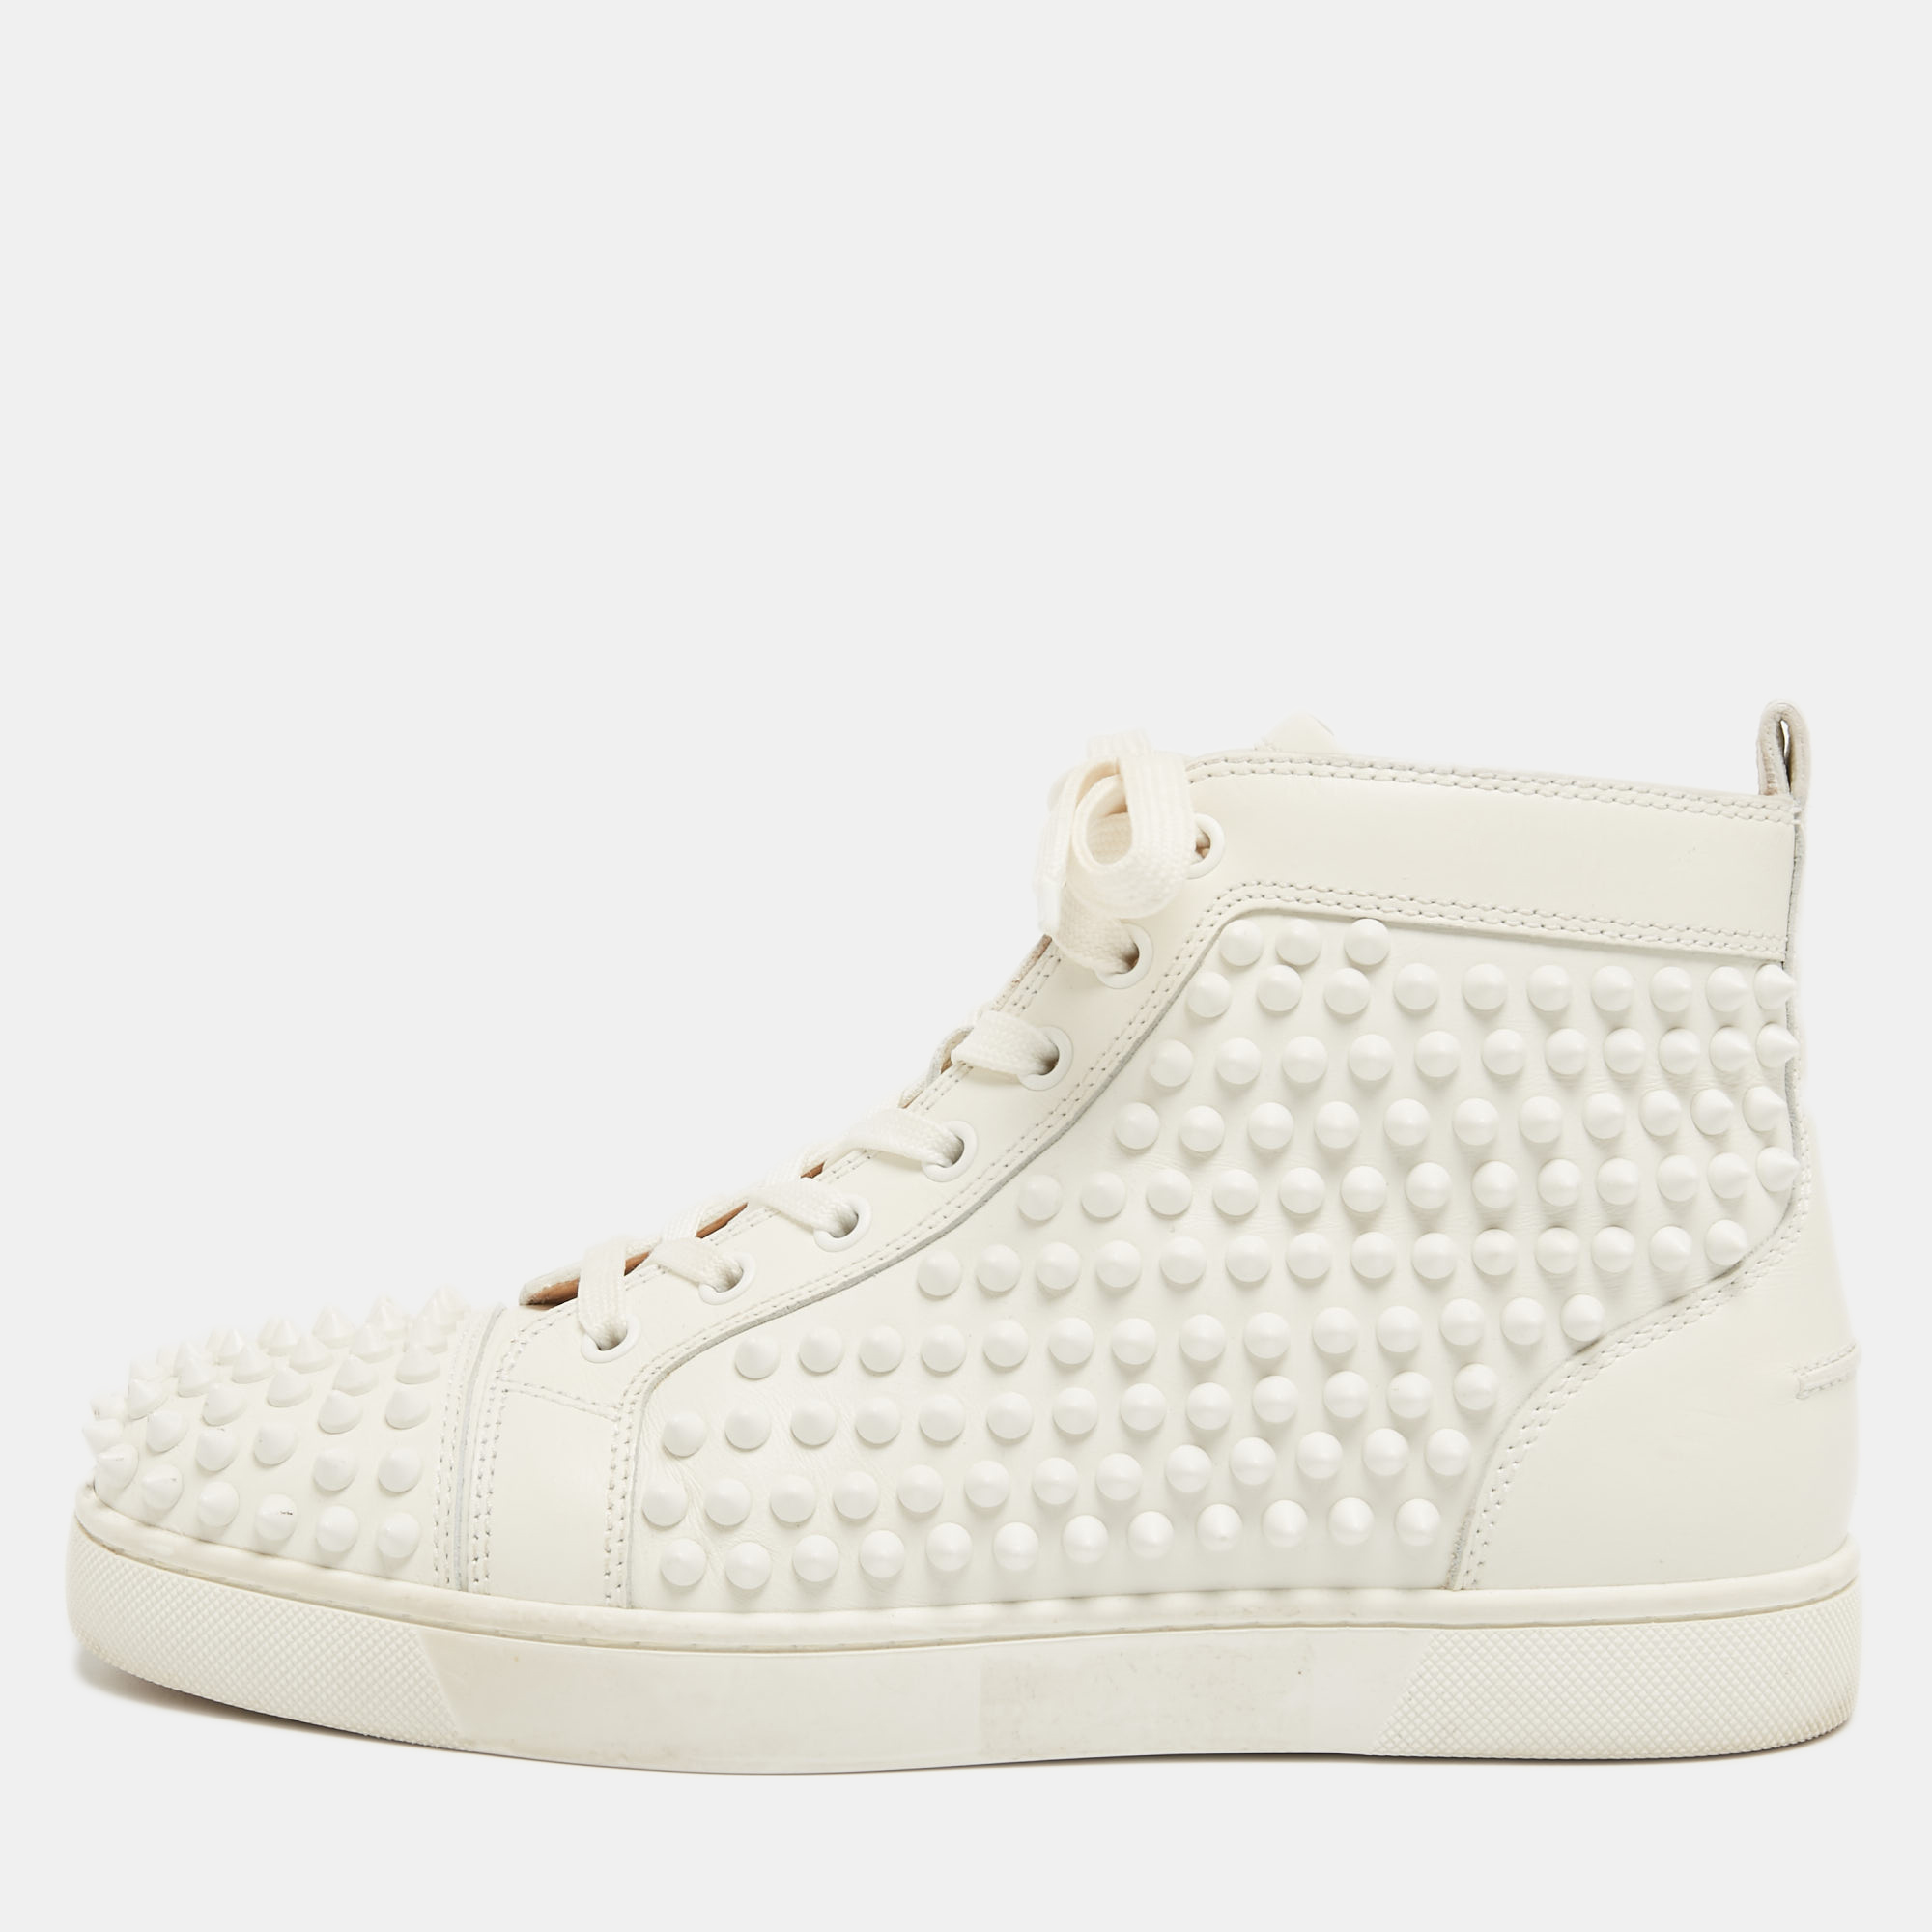 Christian Louboutin White Leather Louis Spikes High Top Sneakers Size 39